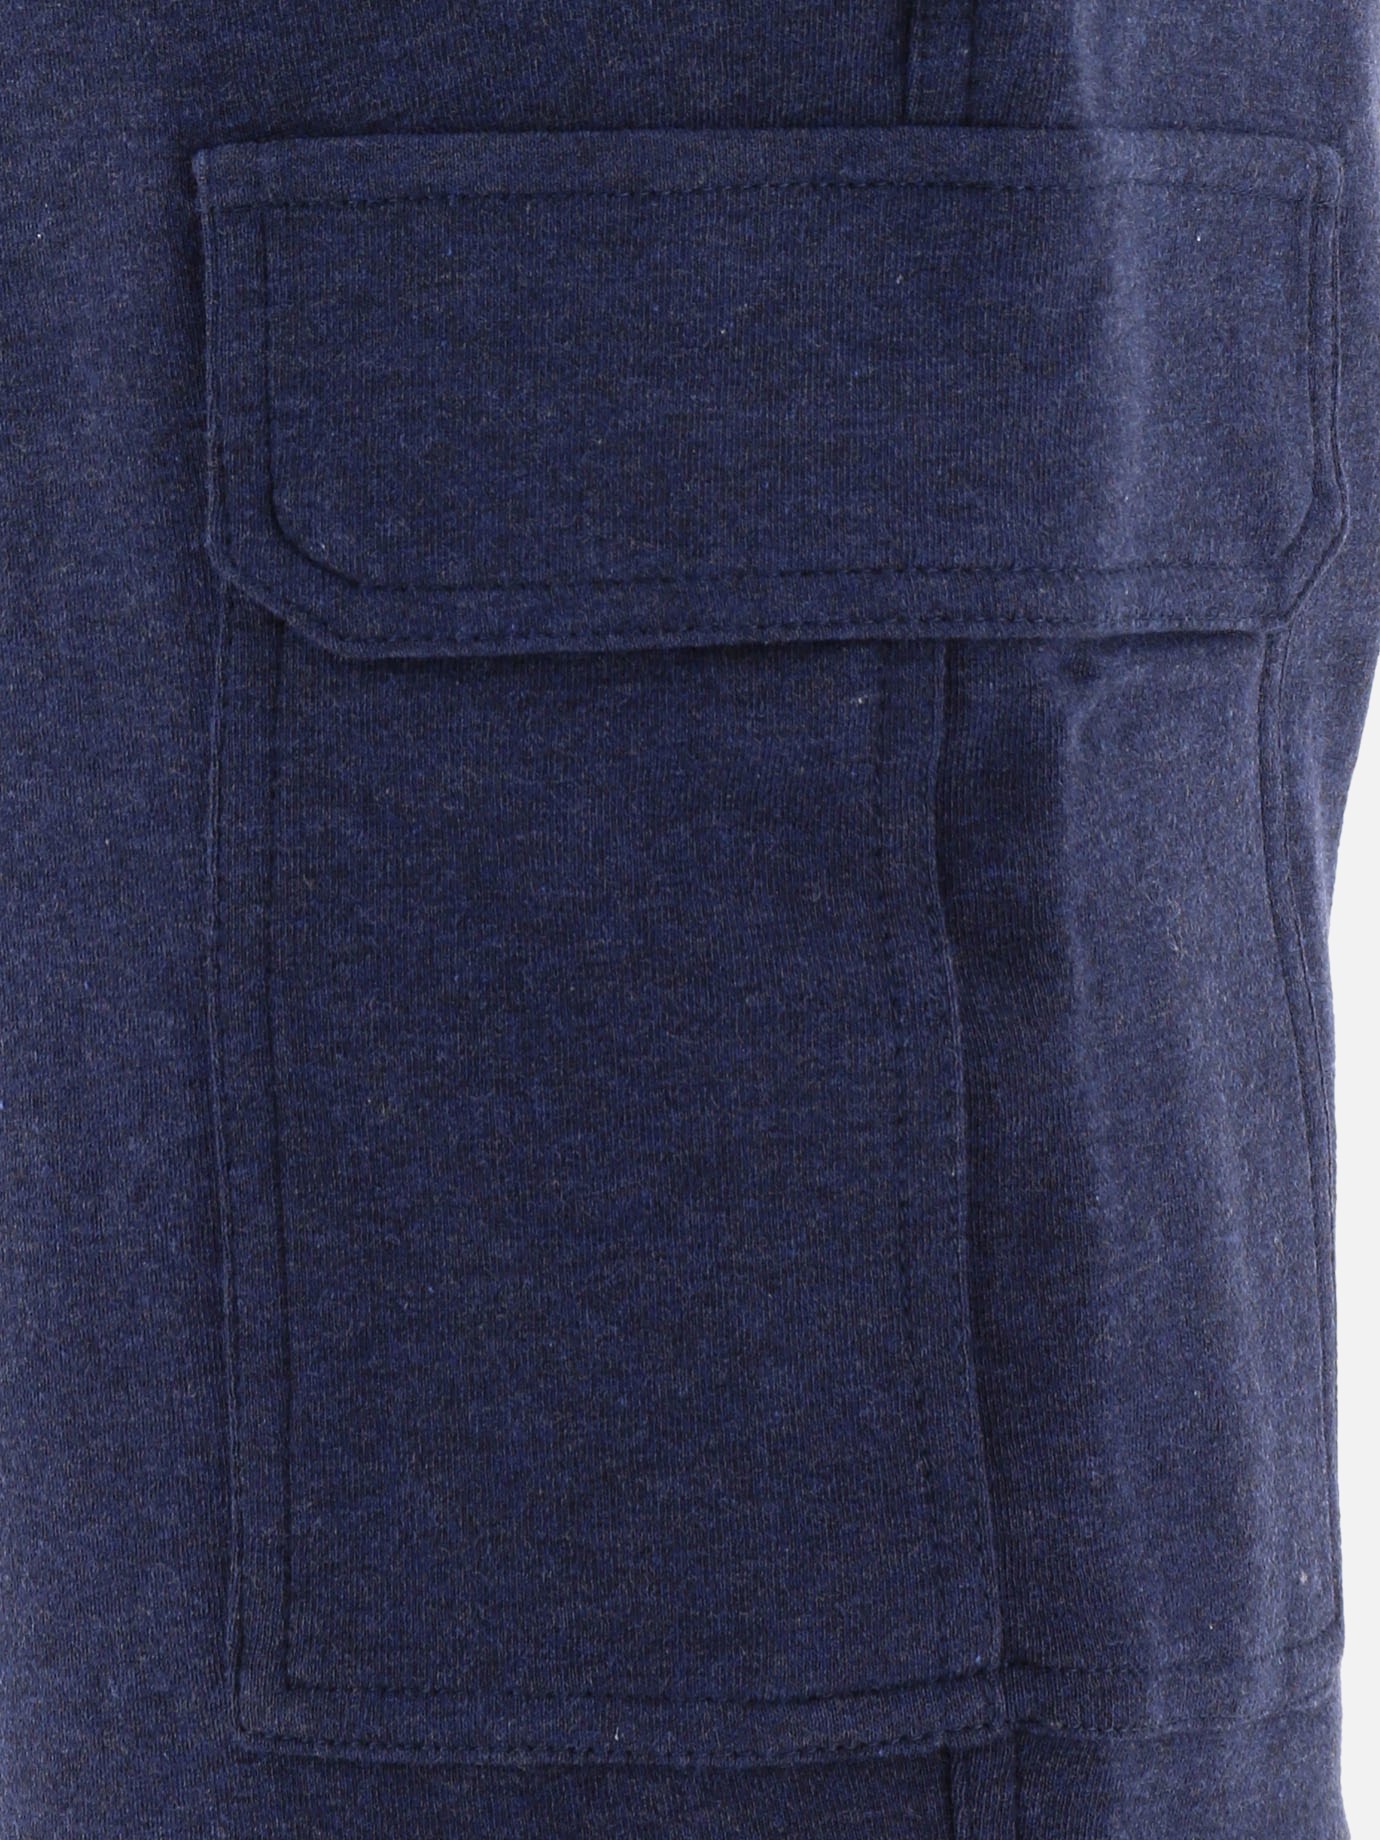 Cargo shorts with drawstring by Brunello Cucinelli